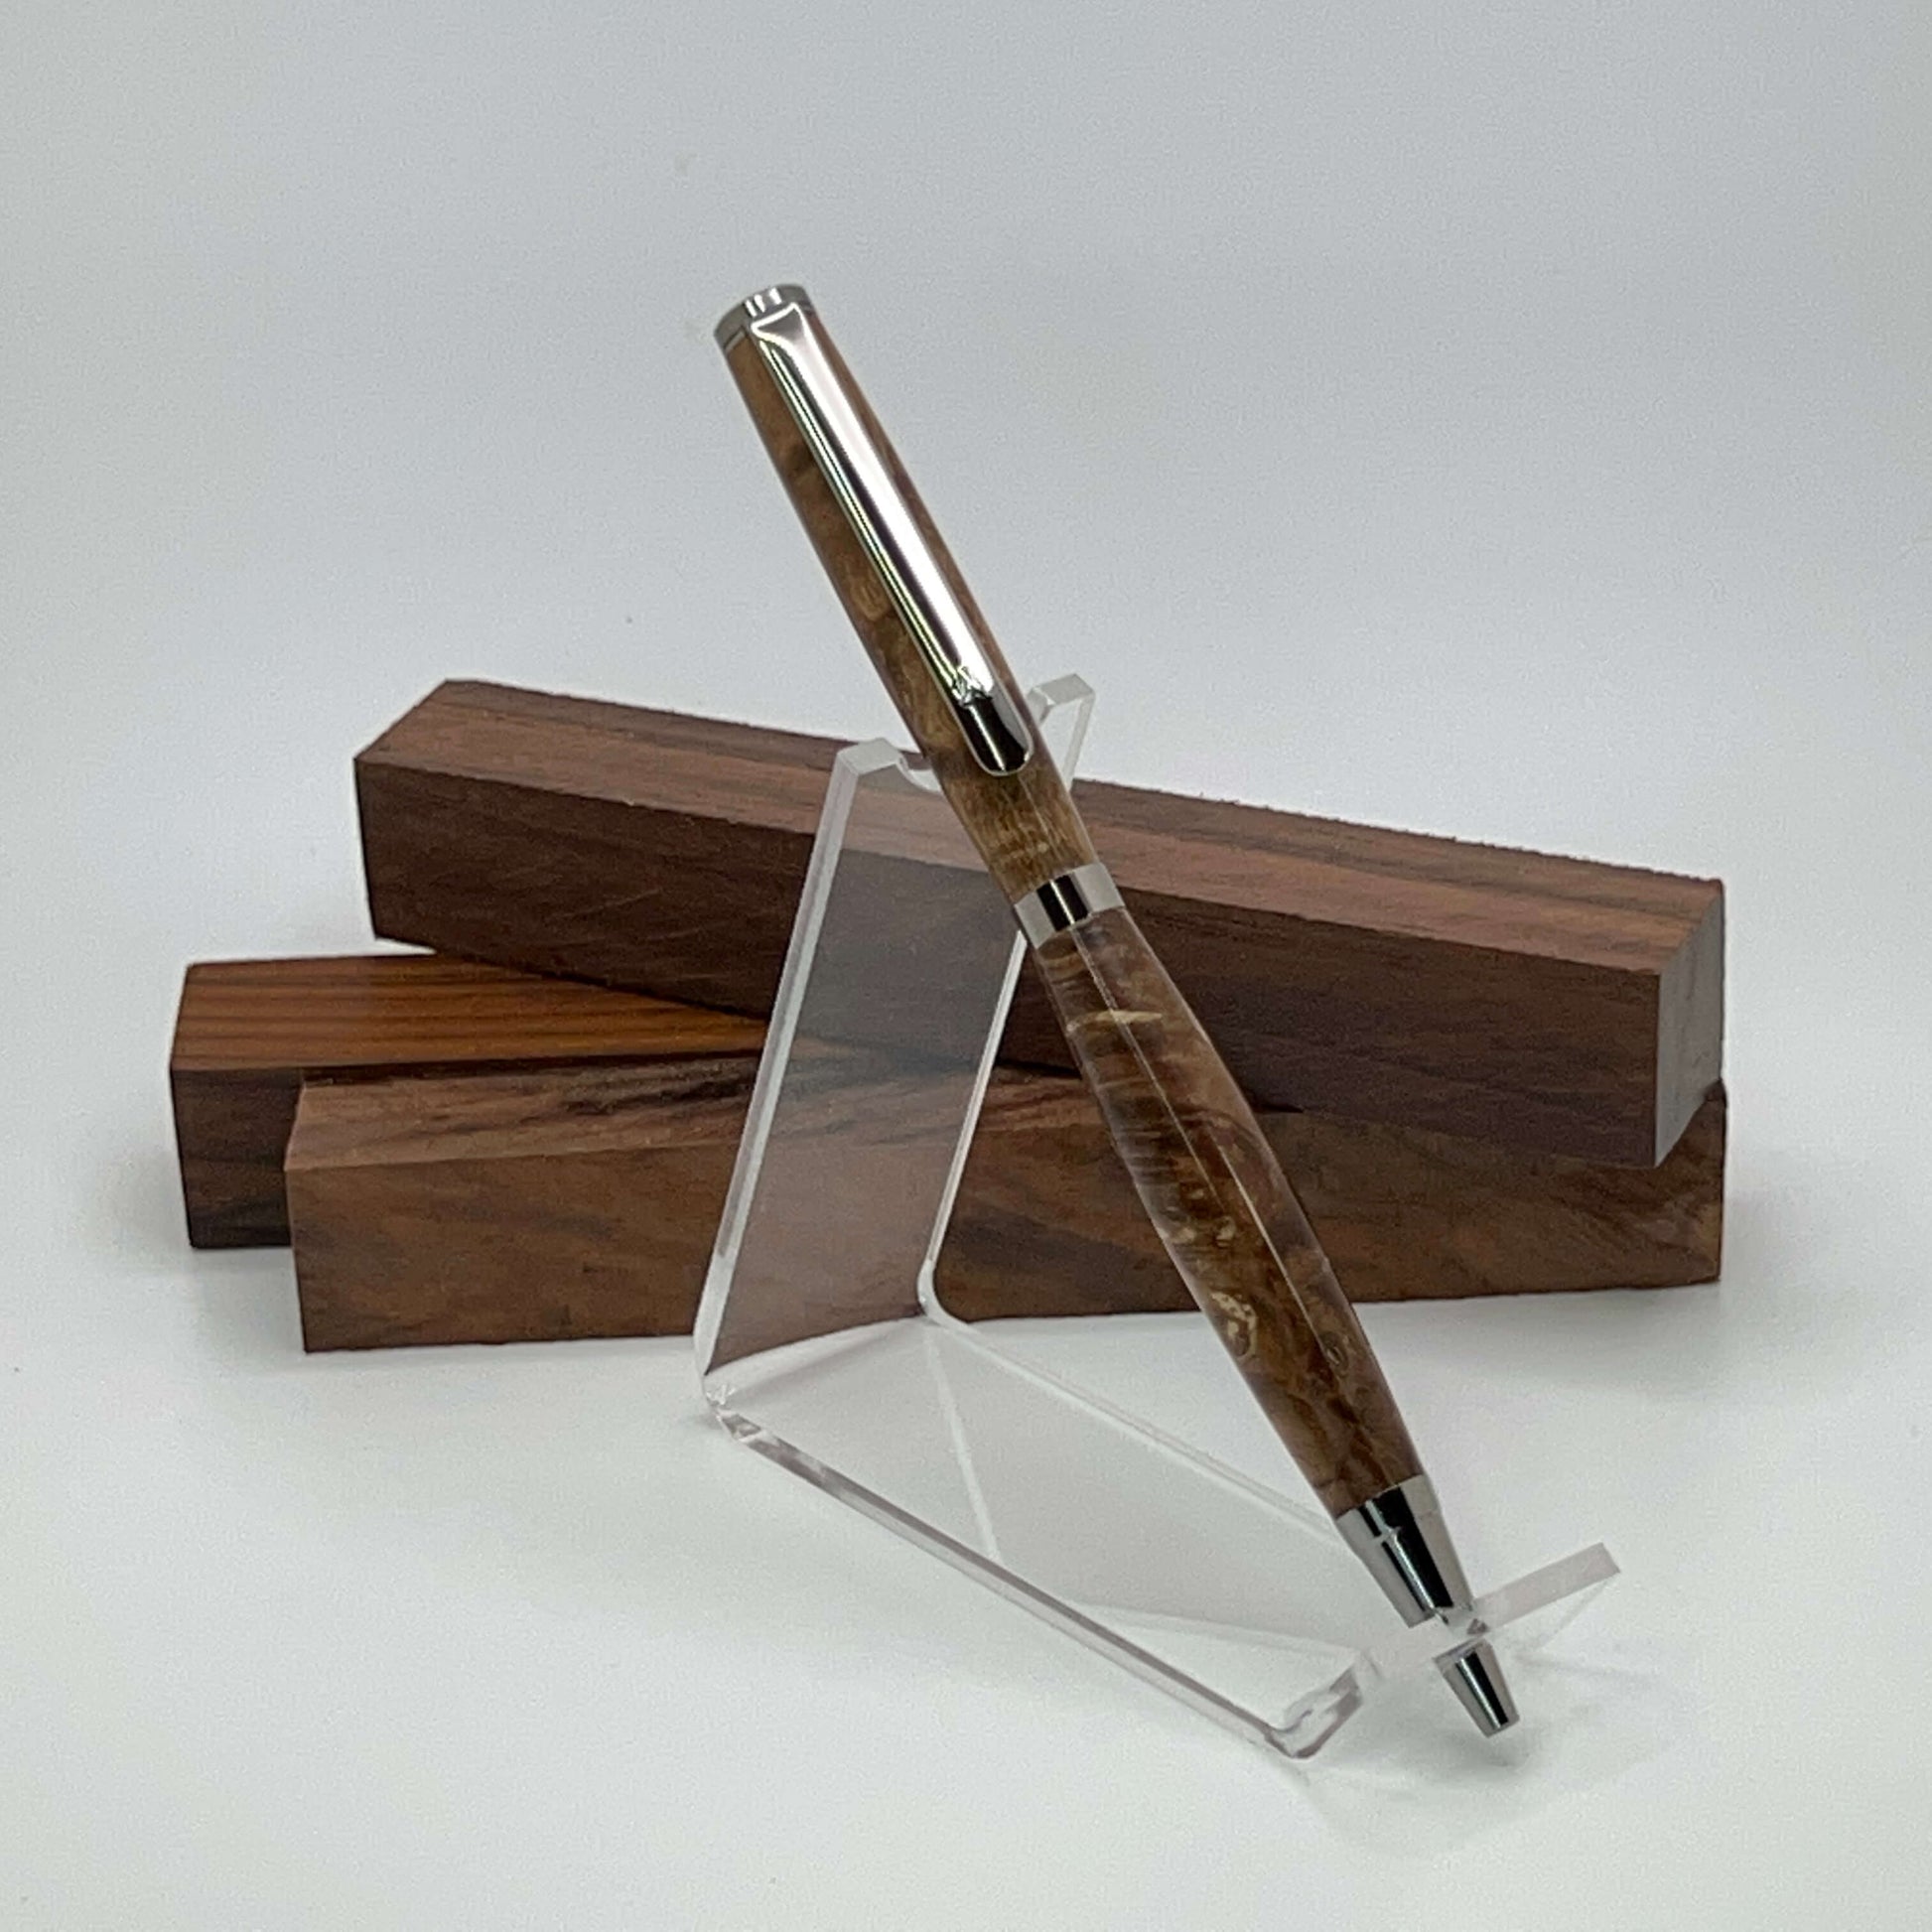 Handcrafted pen with Box Elder Burl wood dyed brown and black titanium hardware